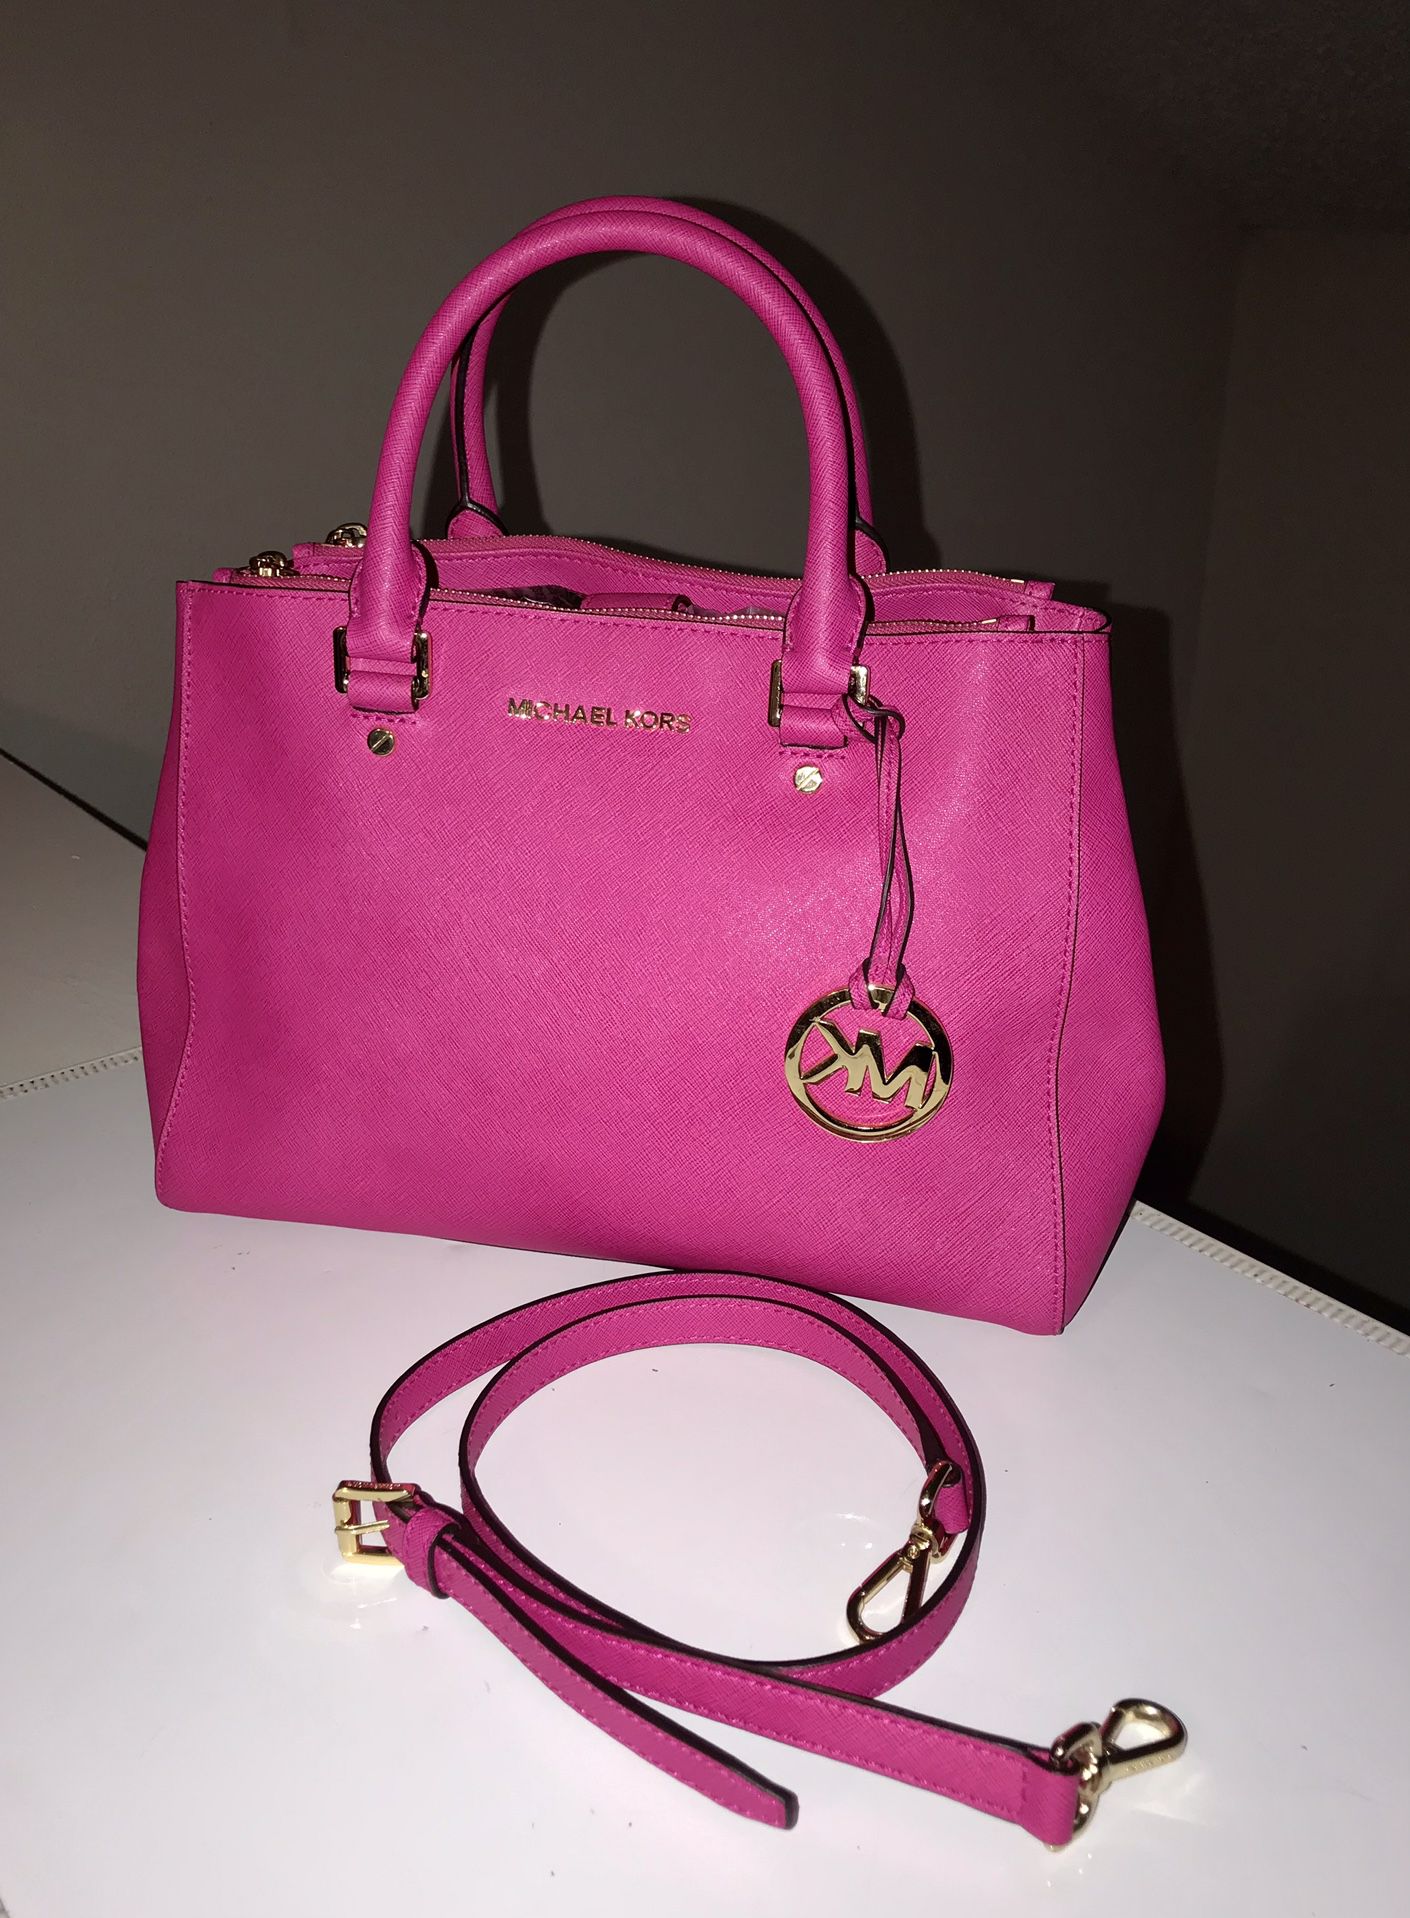 Beijo breast cancer awareness purse for Sale in St. Louis, MO - OfferUp